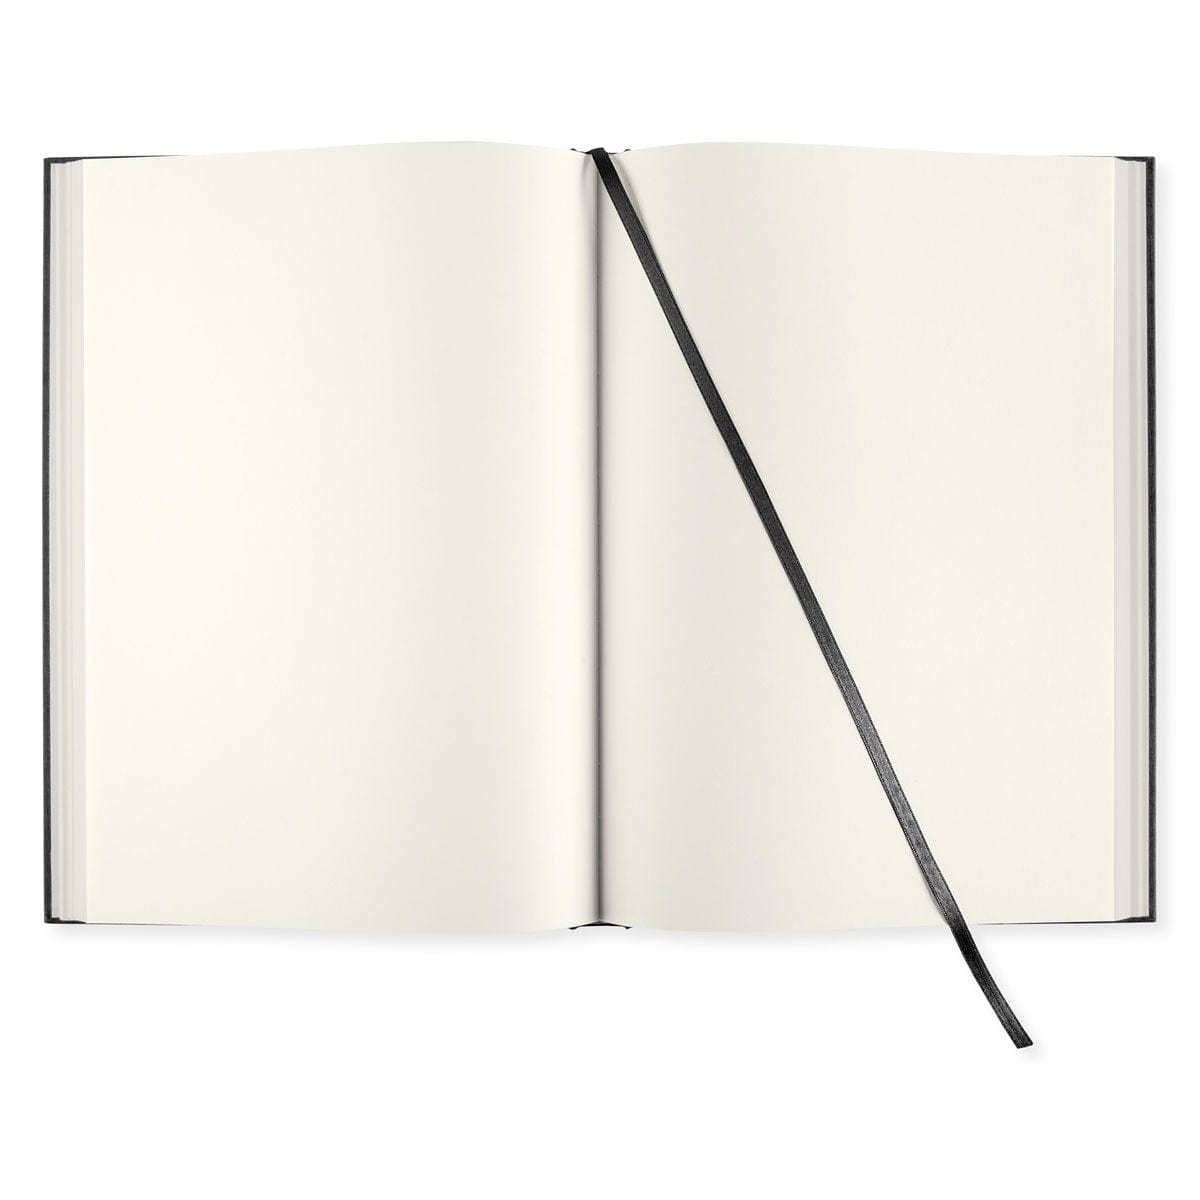 PaperStyle Paperstyle NOTEBOOK A5 256p. Plain Transparent Black